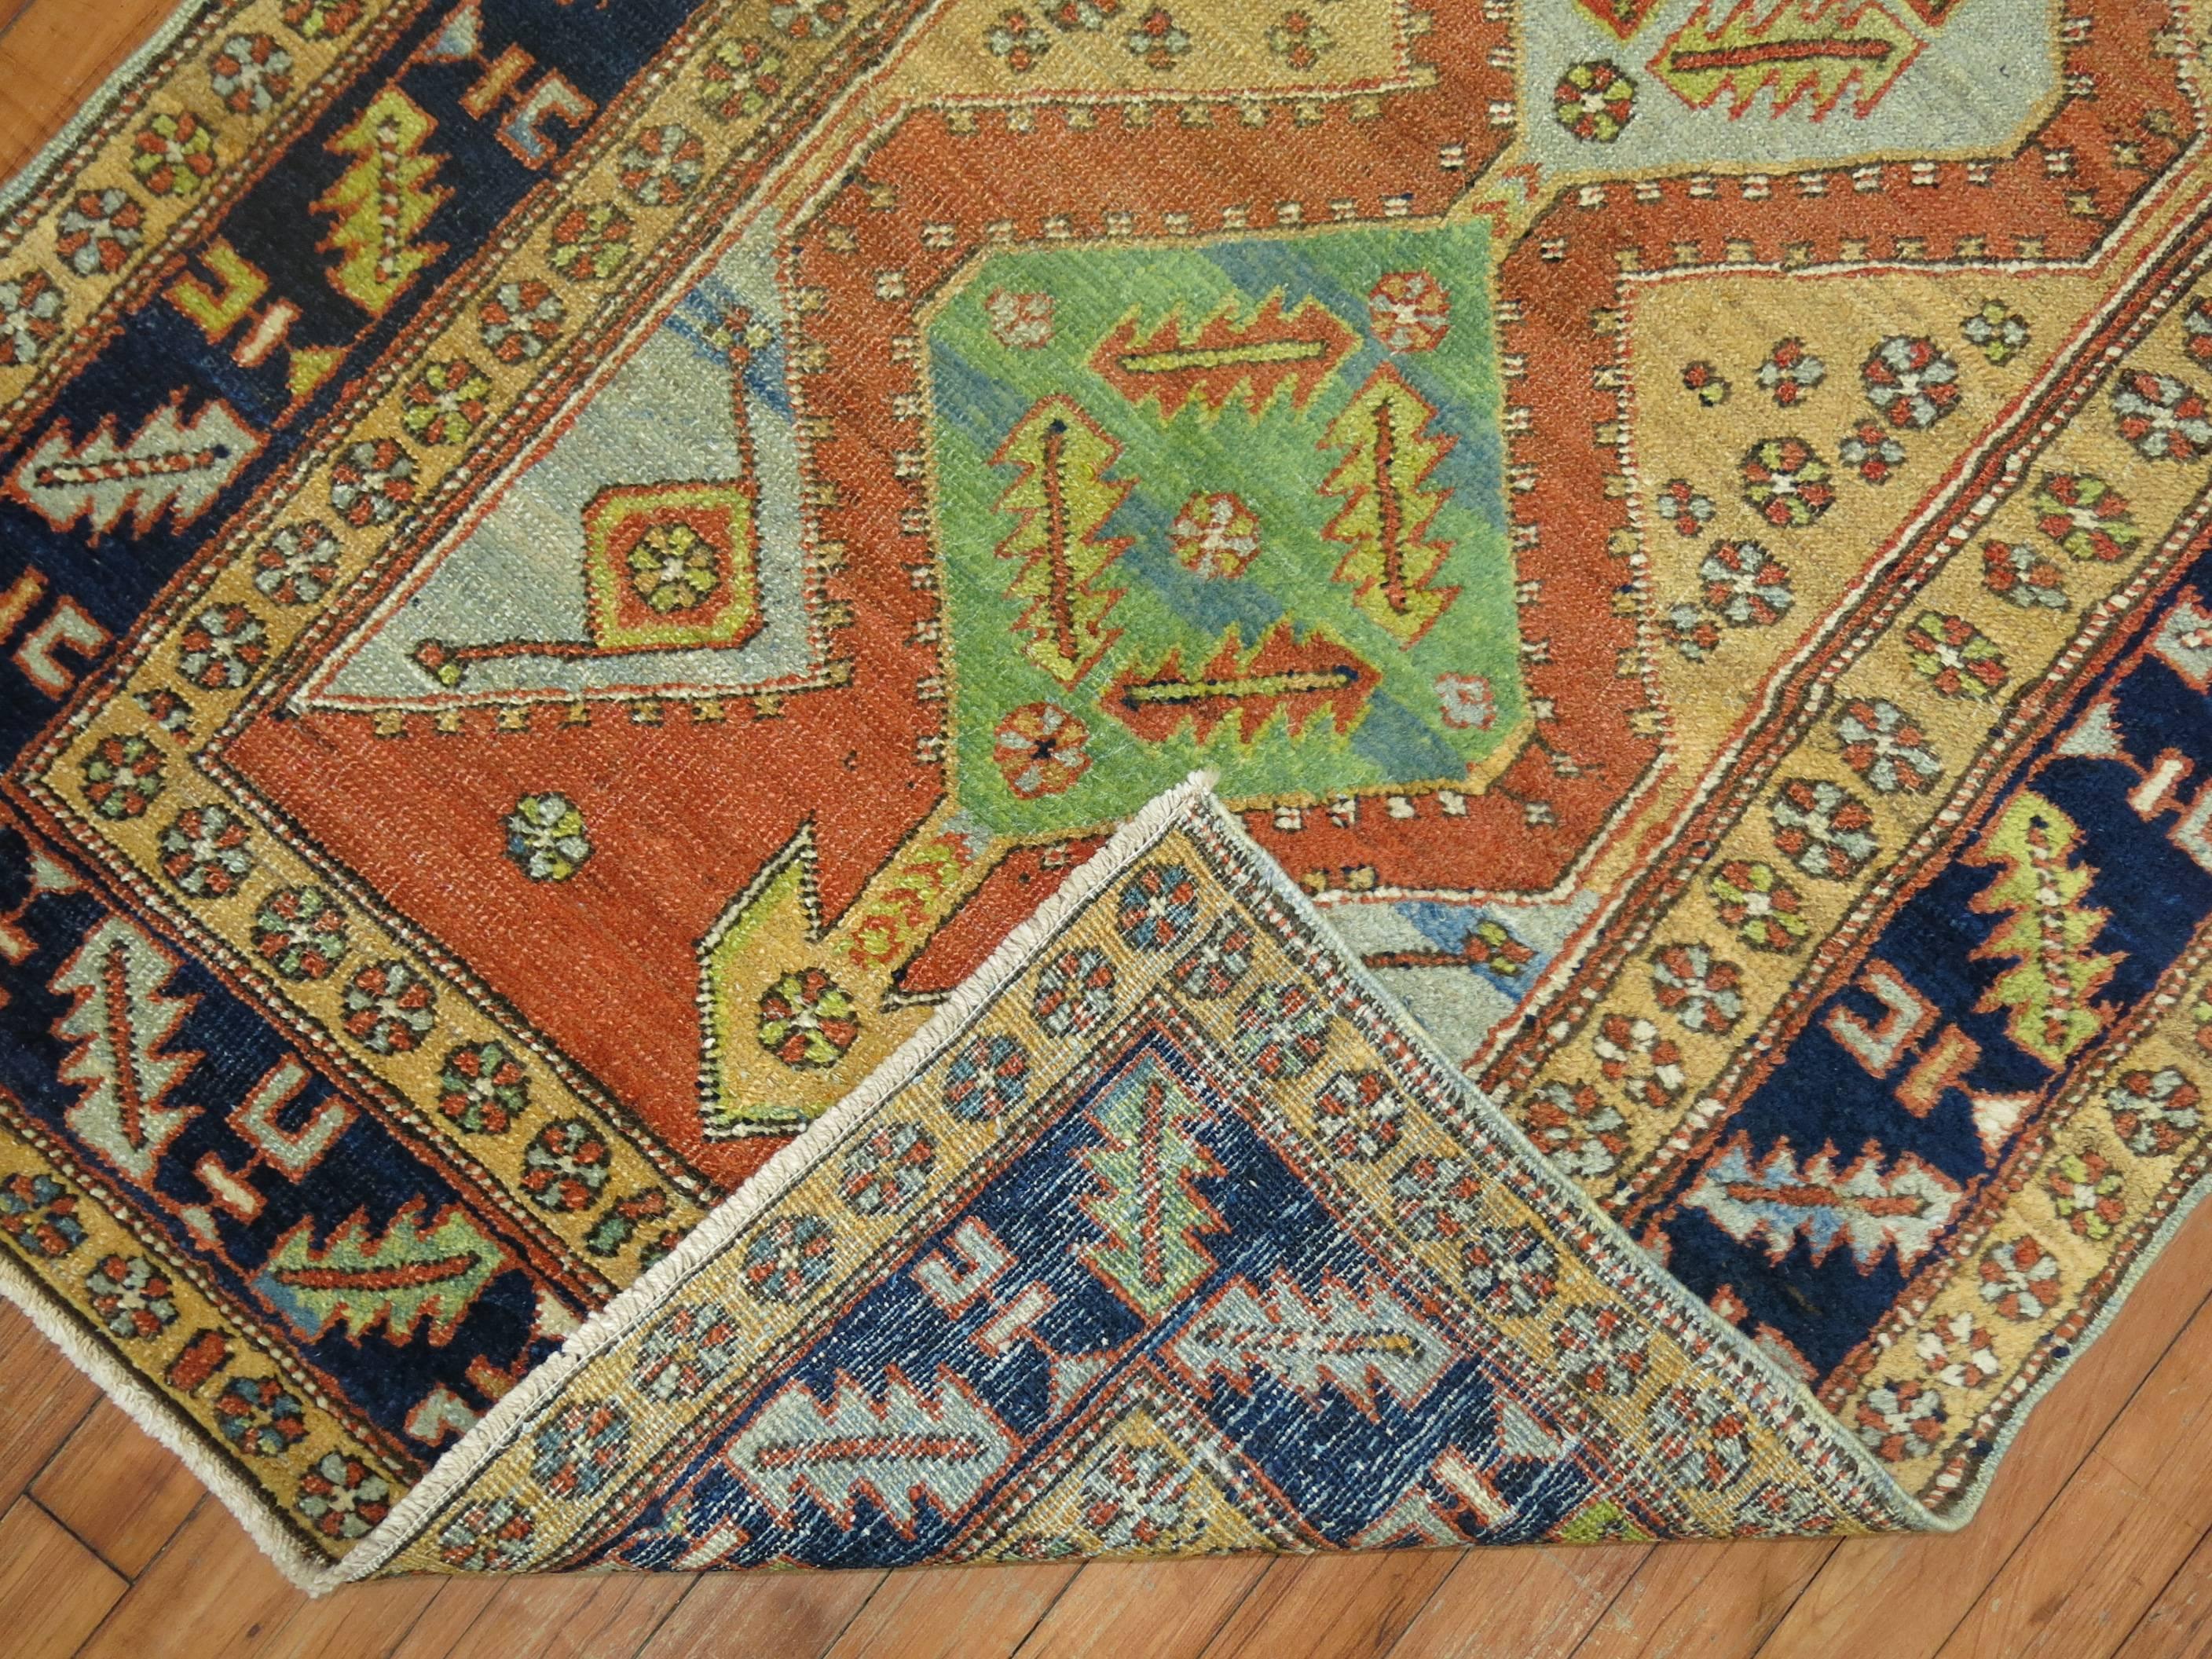 Hand-Woven Antique Persian Heriz Rug in Bright Colors